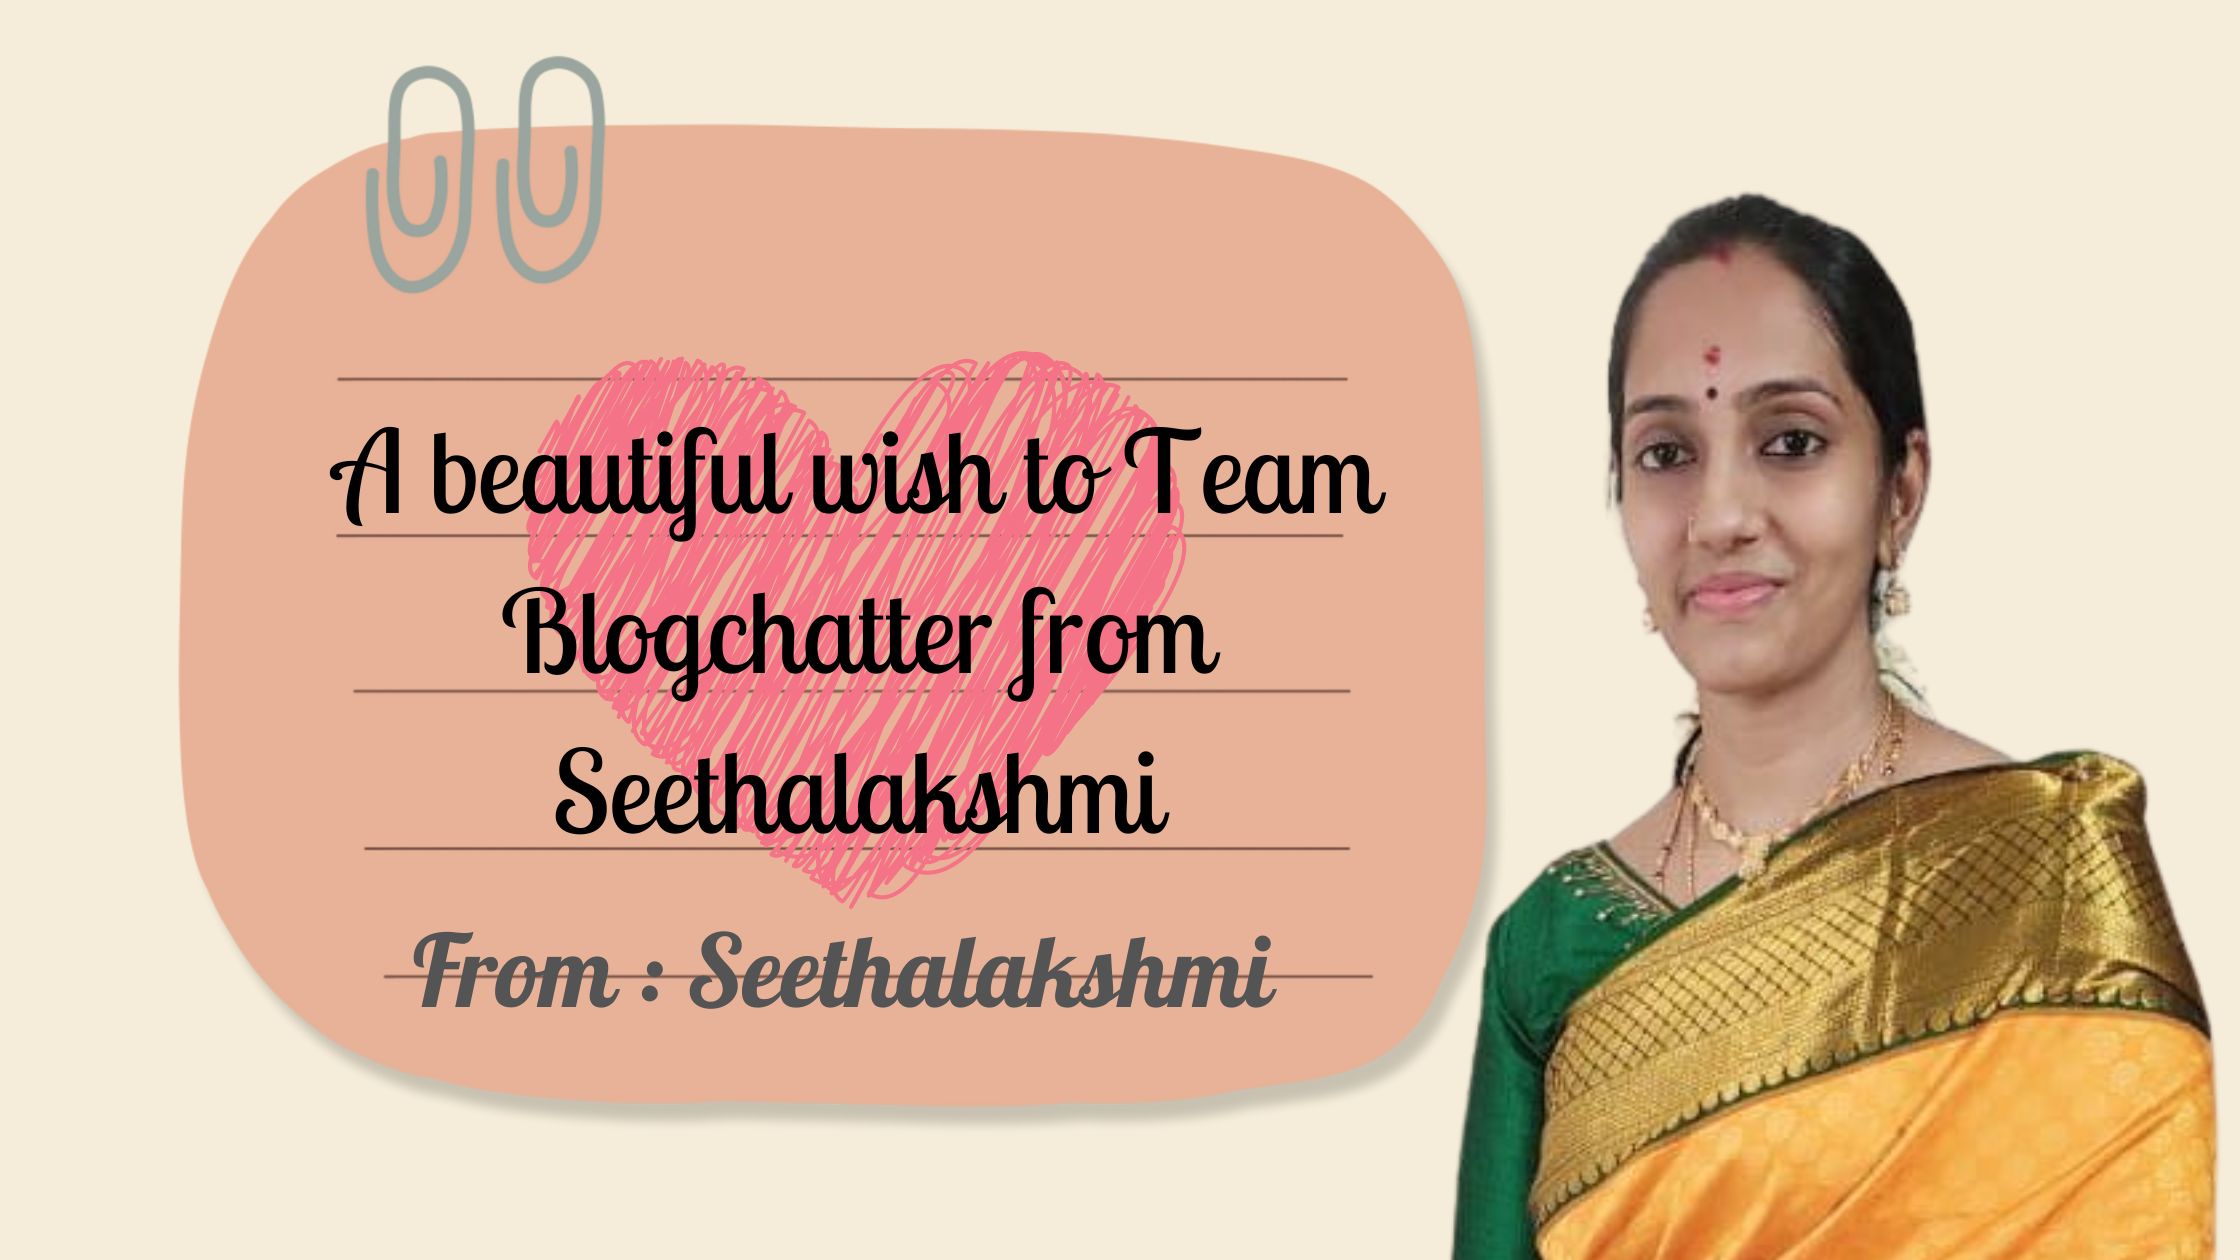 A beautiful wish to Team Blogchatter from Seethalakshmi